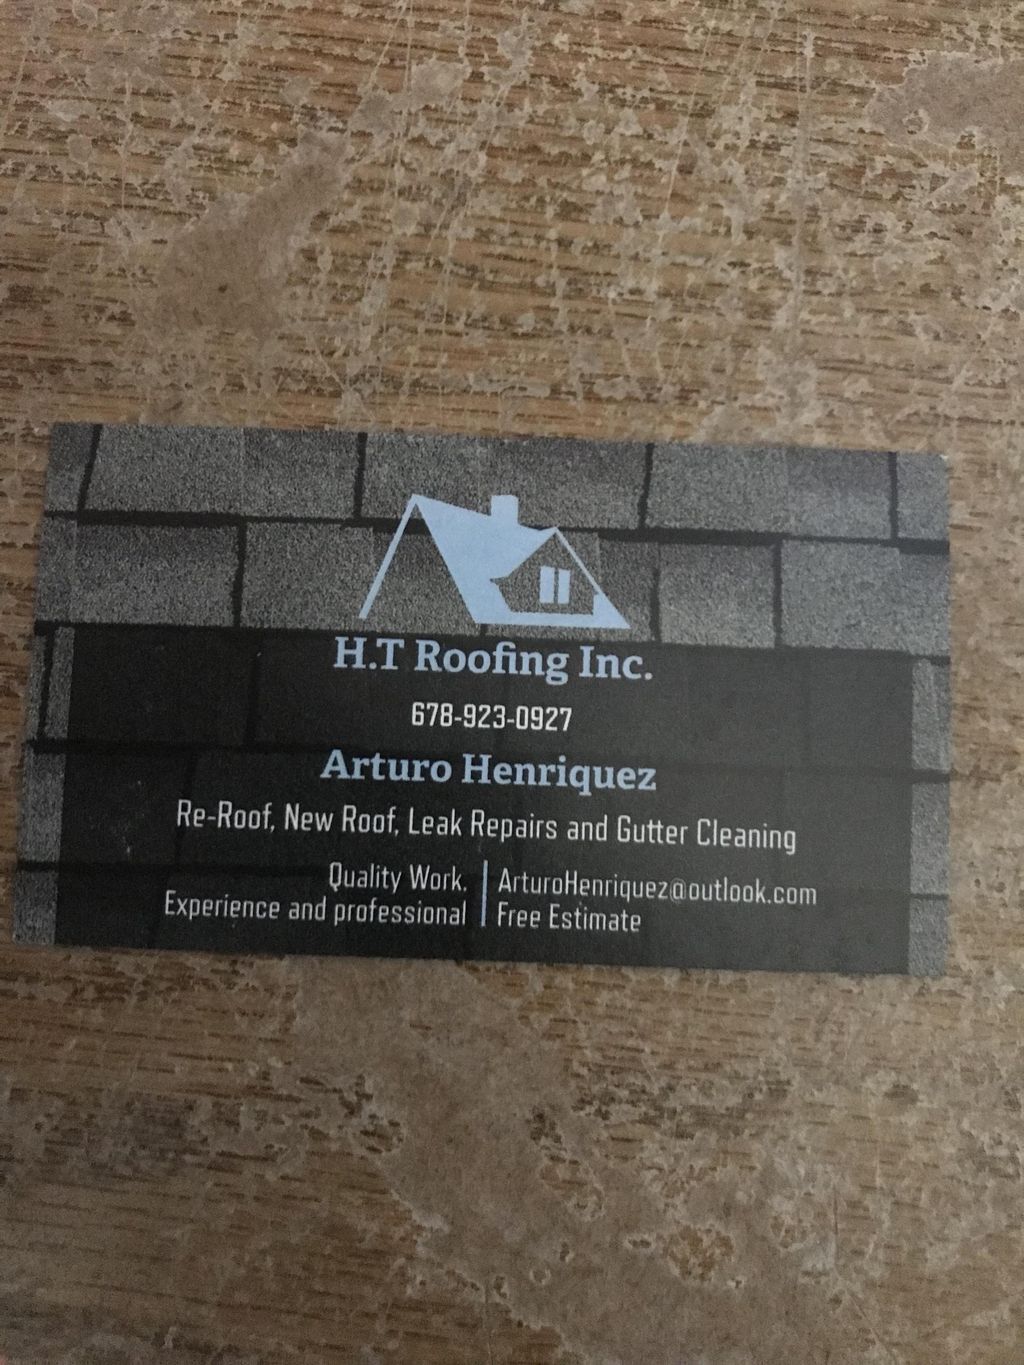 H.T Roofing Inc.